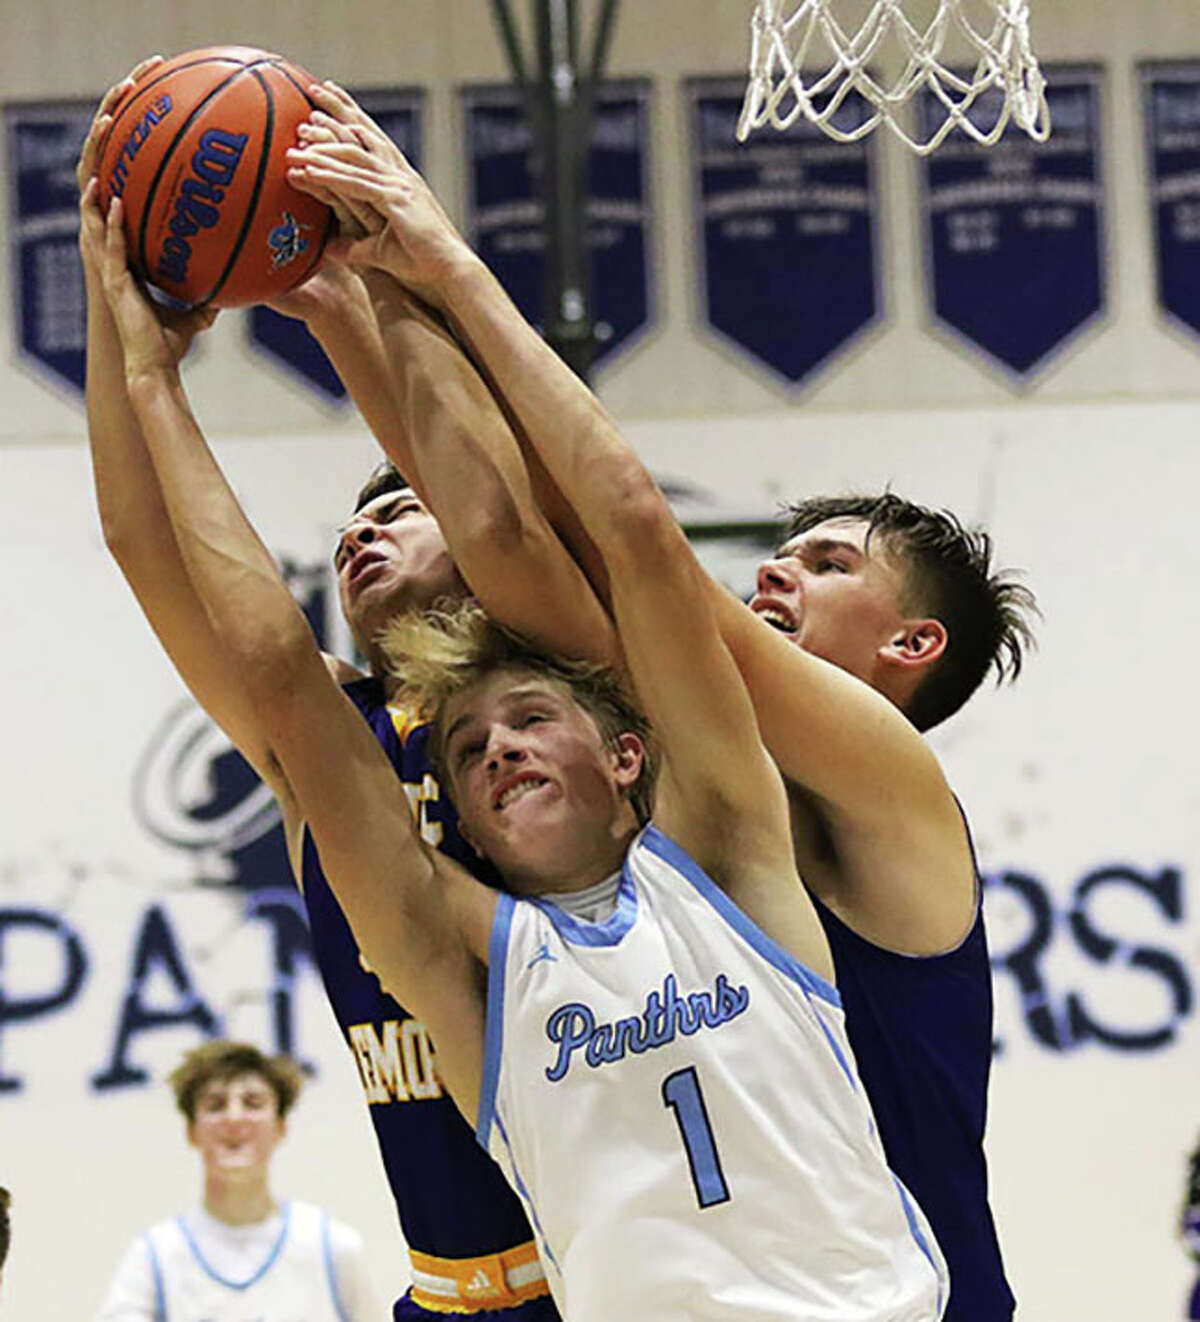 Jersey's Francis Vogel (1) battles CM's Sam Buckley (right) and Dalton Buhs for a rebound in a MVC boys basketball game Friday night at Havens Gym in Jerseyville. 